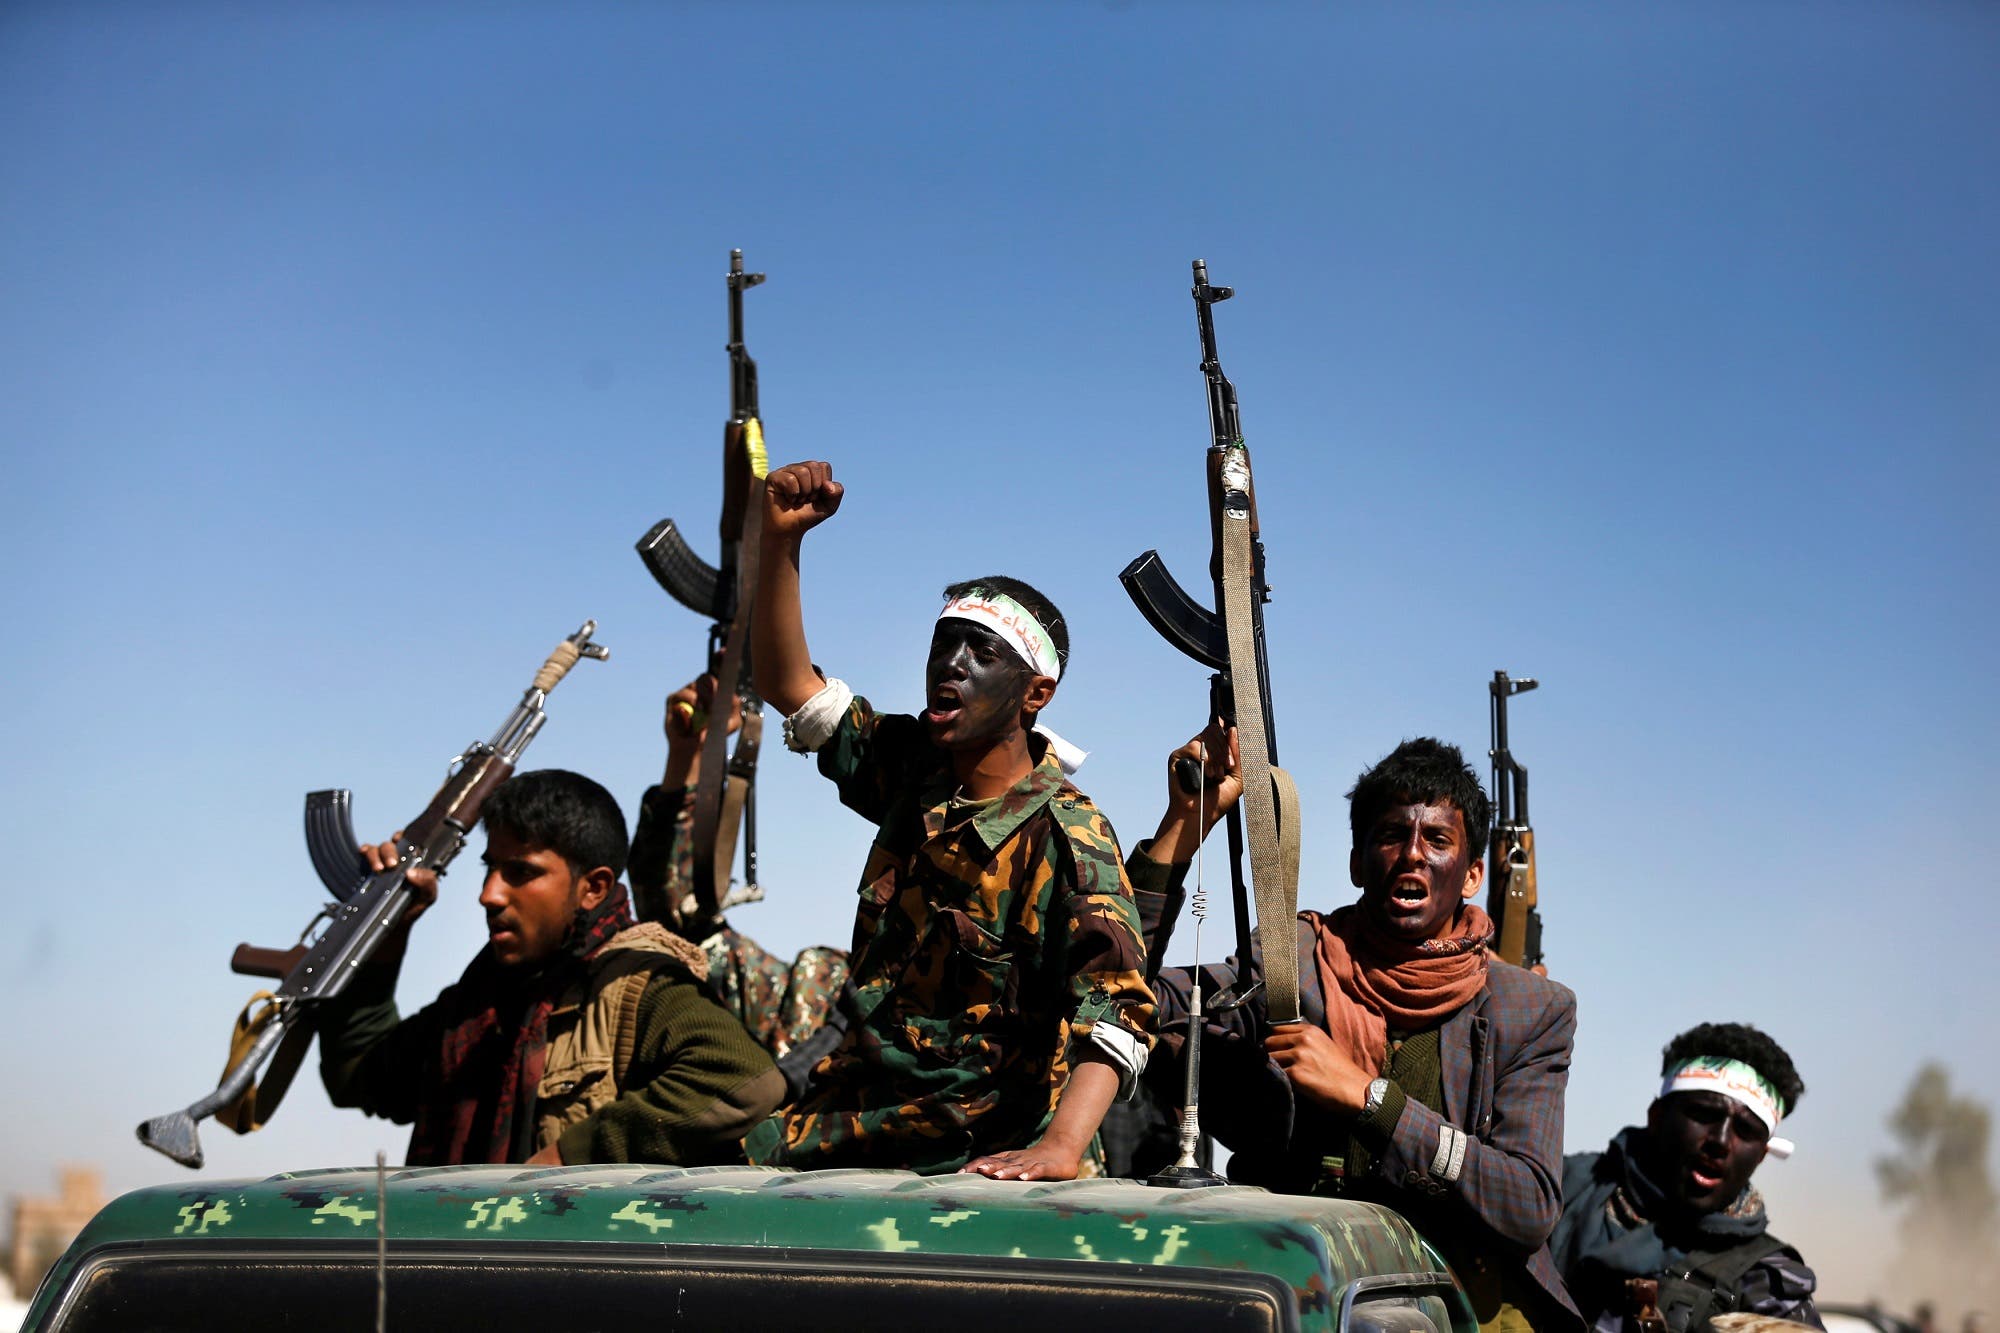 Newly recruited Houthi fighters ride on the back or a truck during a parade before heading to the frontline to fight against government forces, in Sanaa, Yemen January 3, 2017. (Reuters)